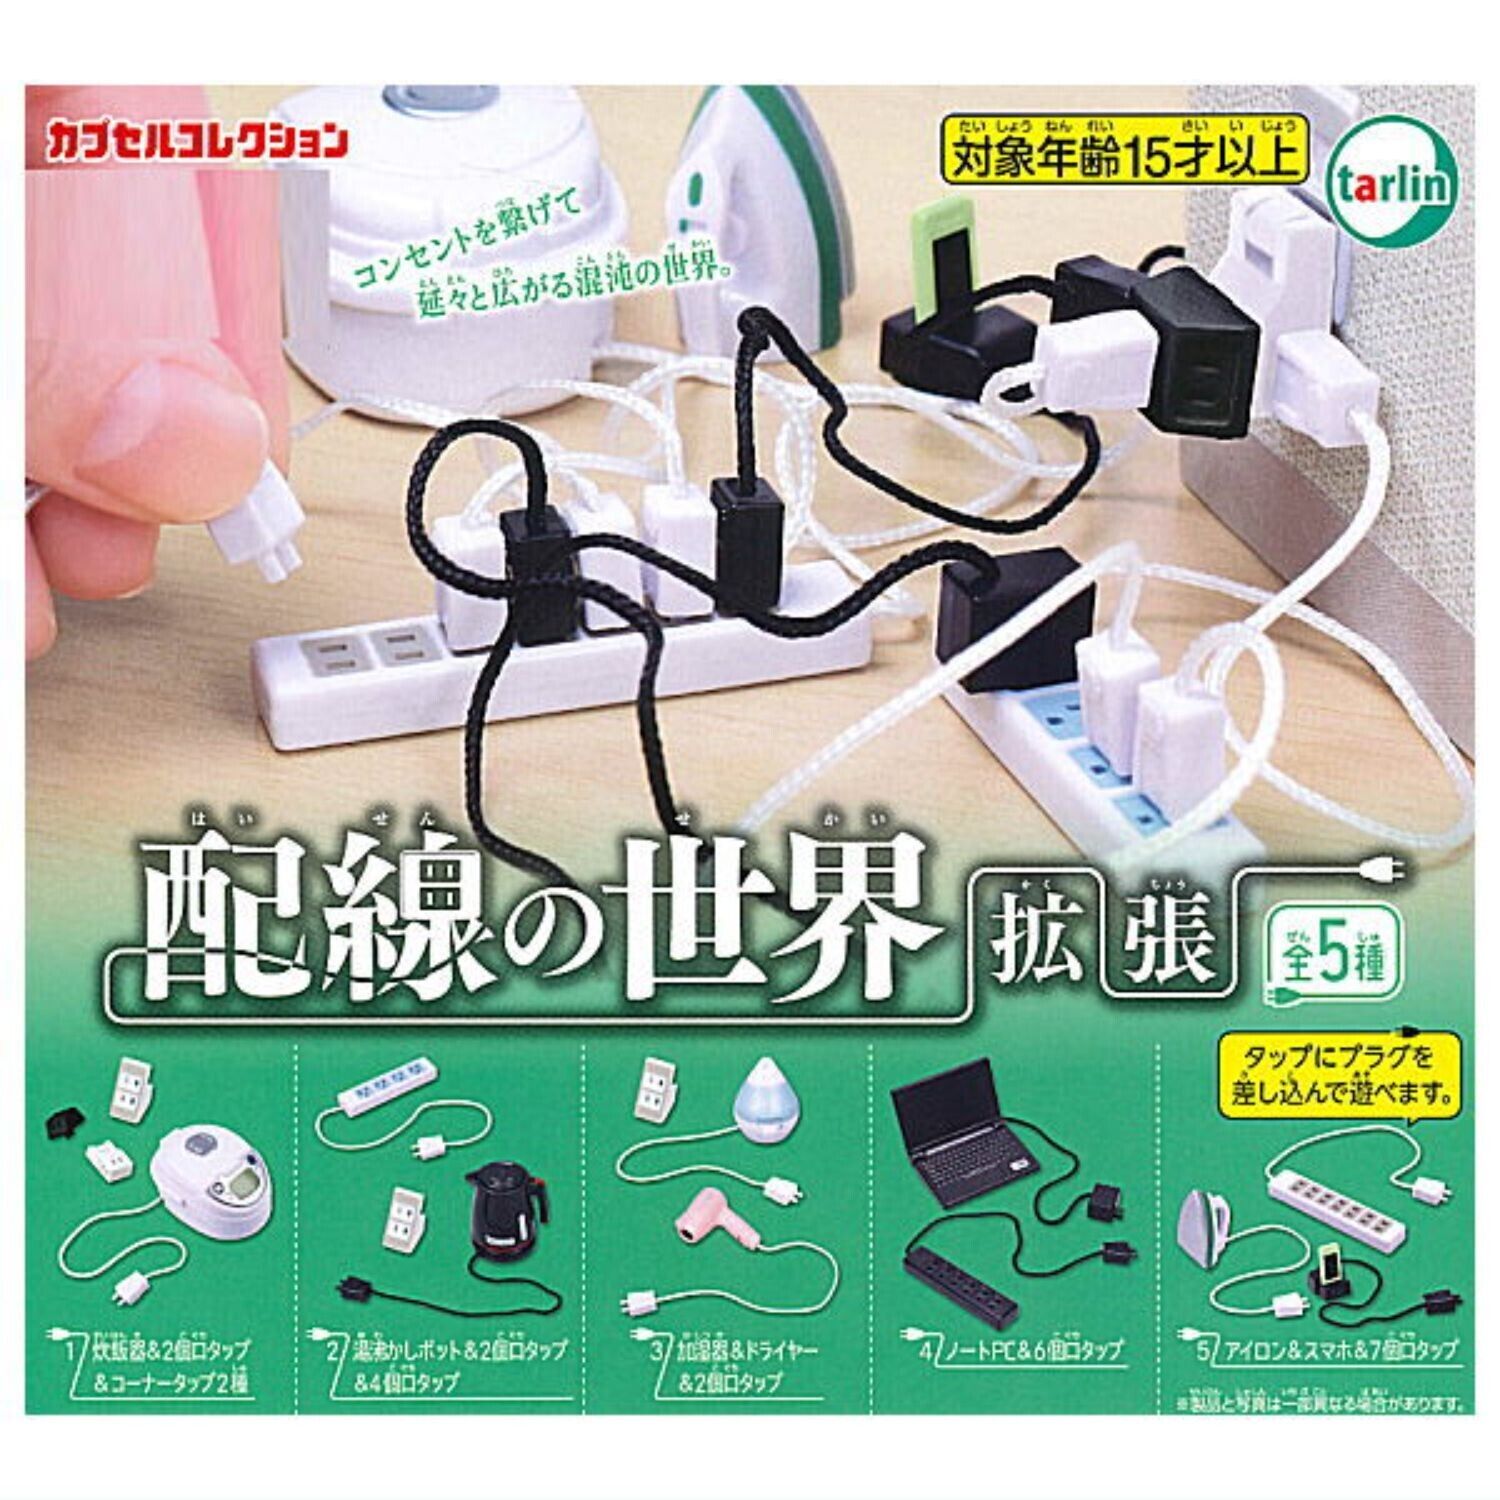 Wiring world Expansion Mascot Capsule Toy 5 Types Full Comp Set Gacha New Japan